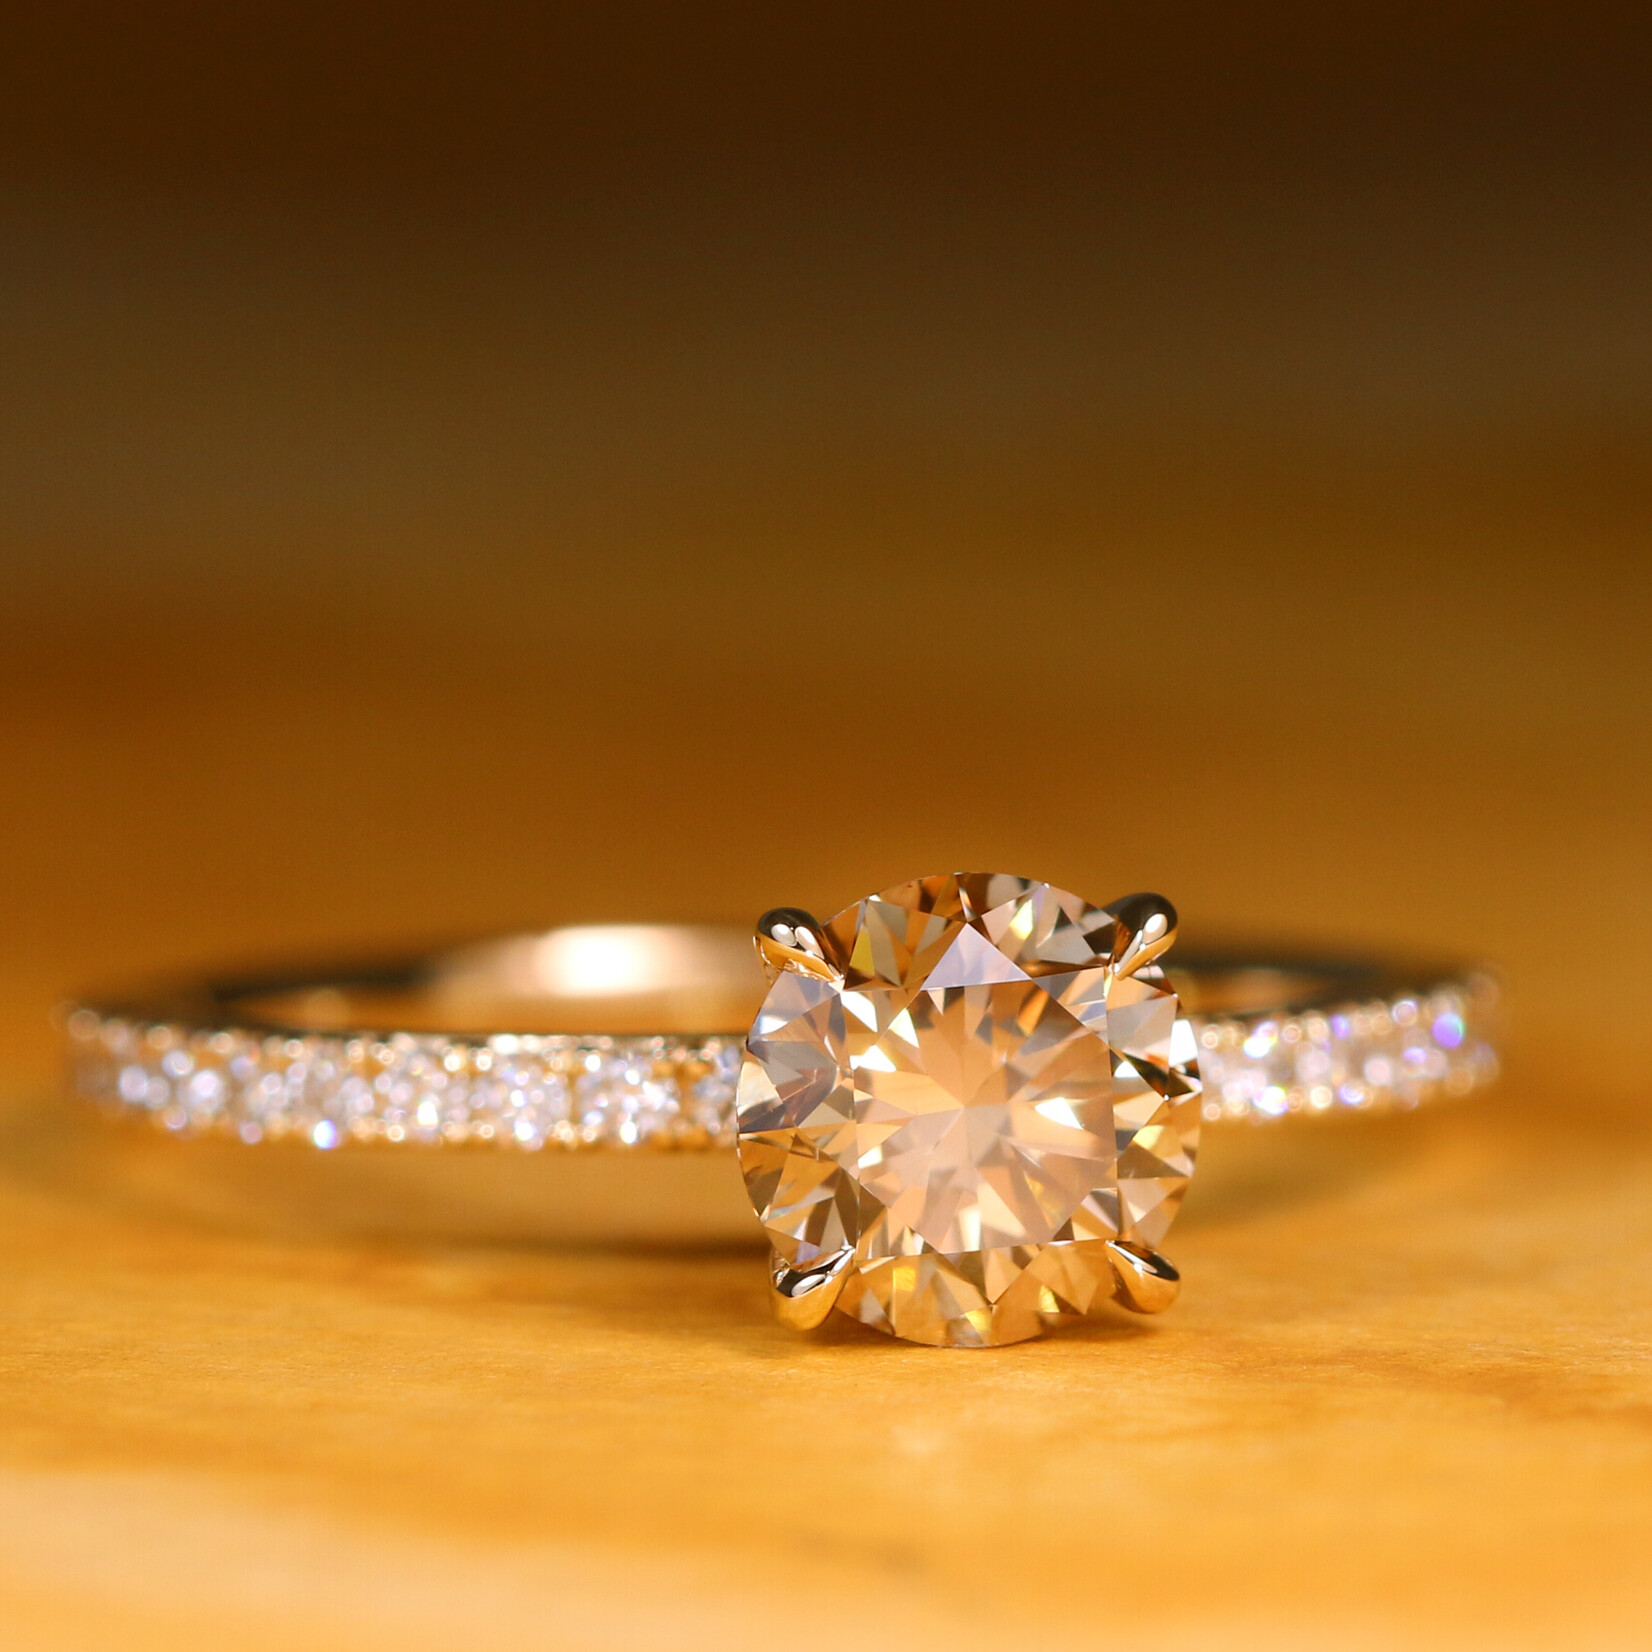 Baxter Moerman Grace Engagement Ring with Champagne Diamond